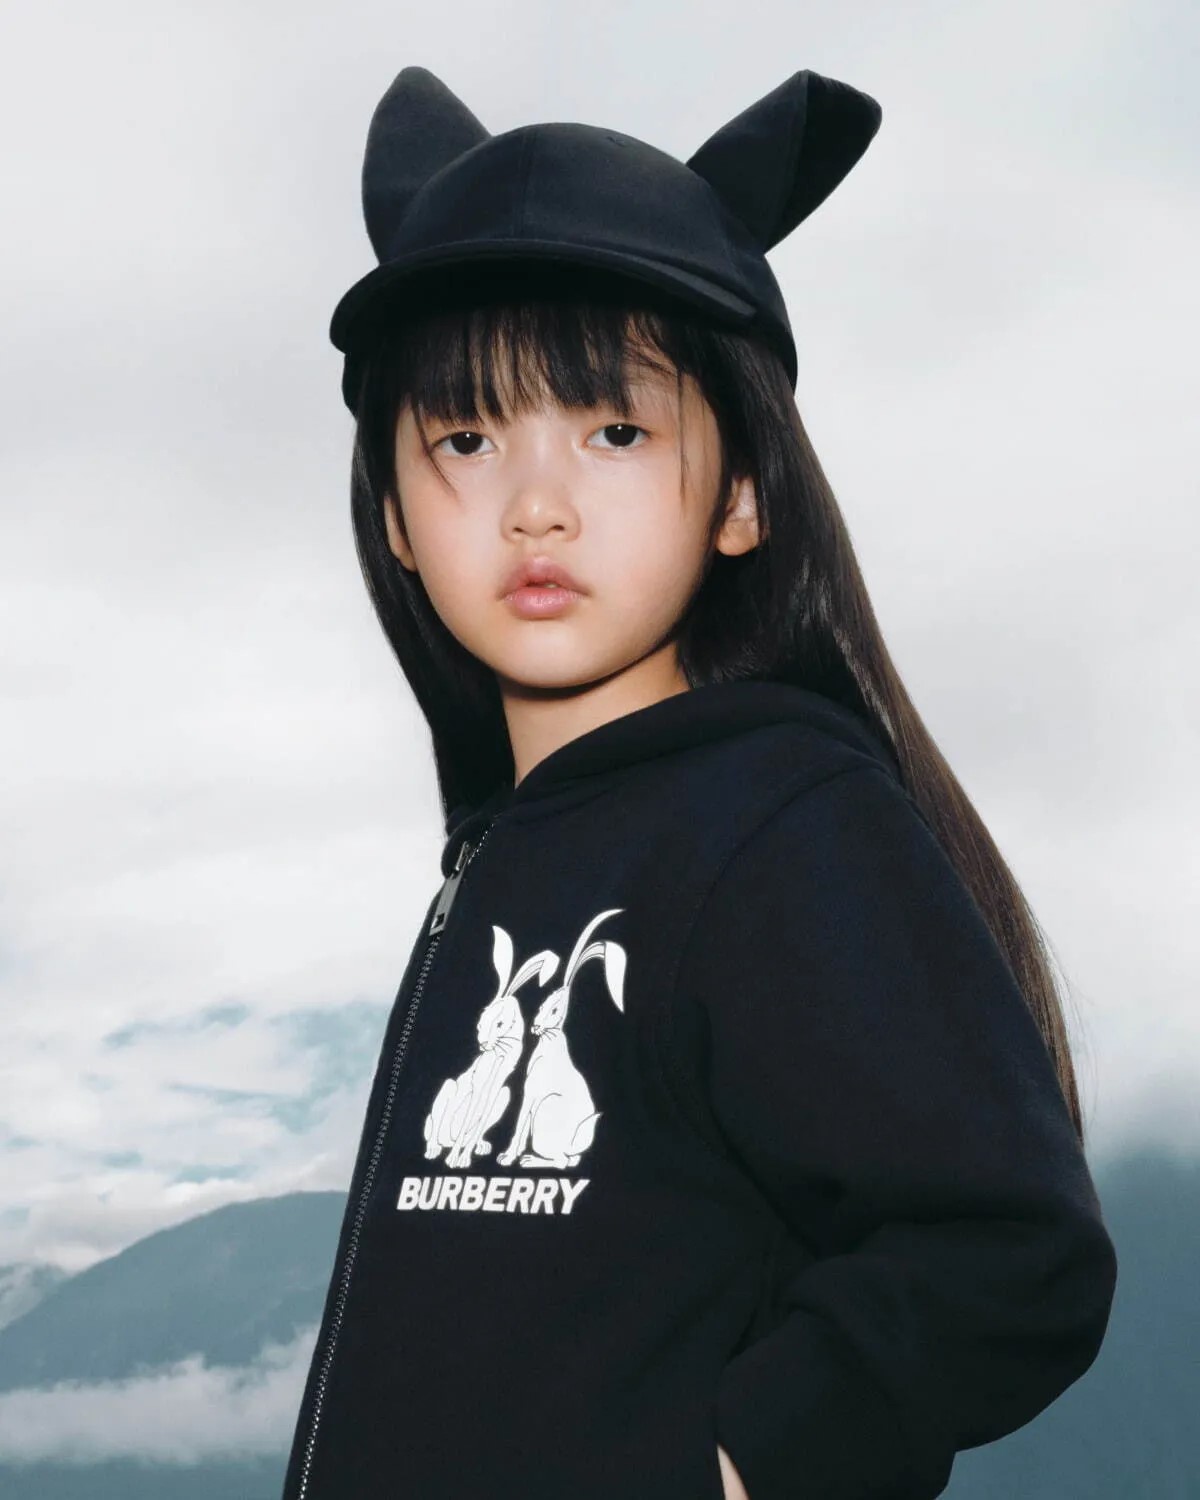 Burberry unveils “Year of the Rabbit” playful capsule